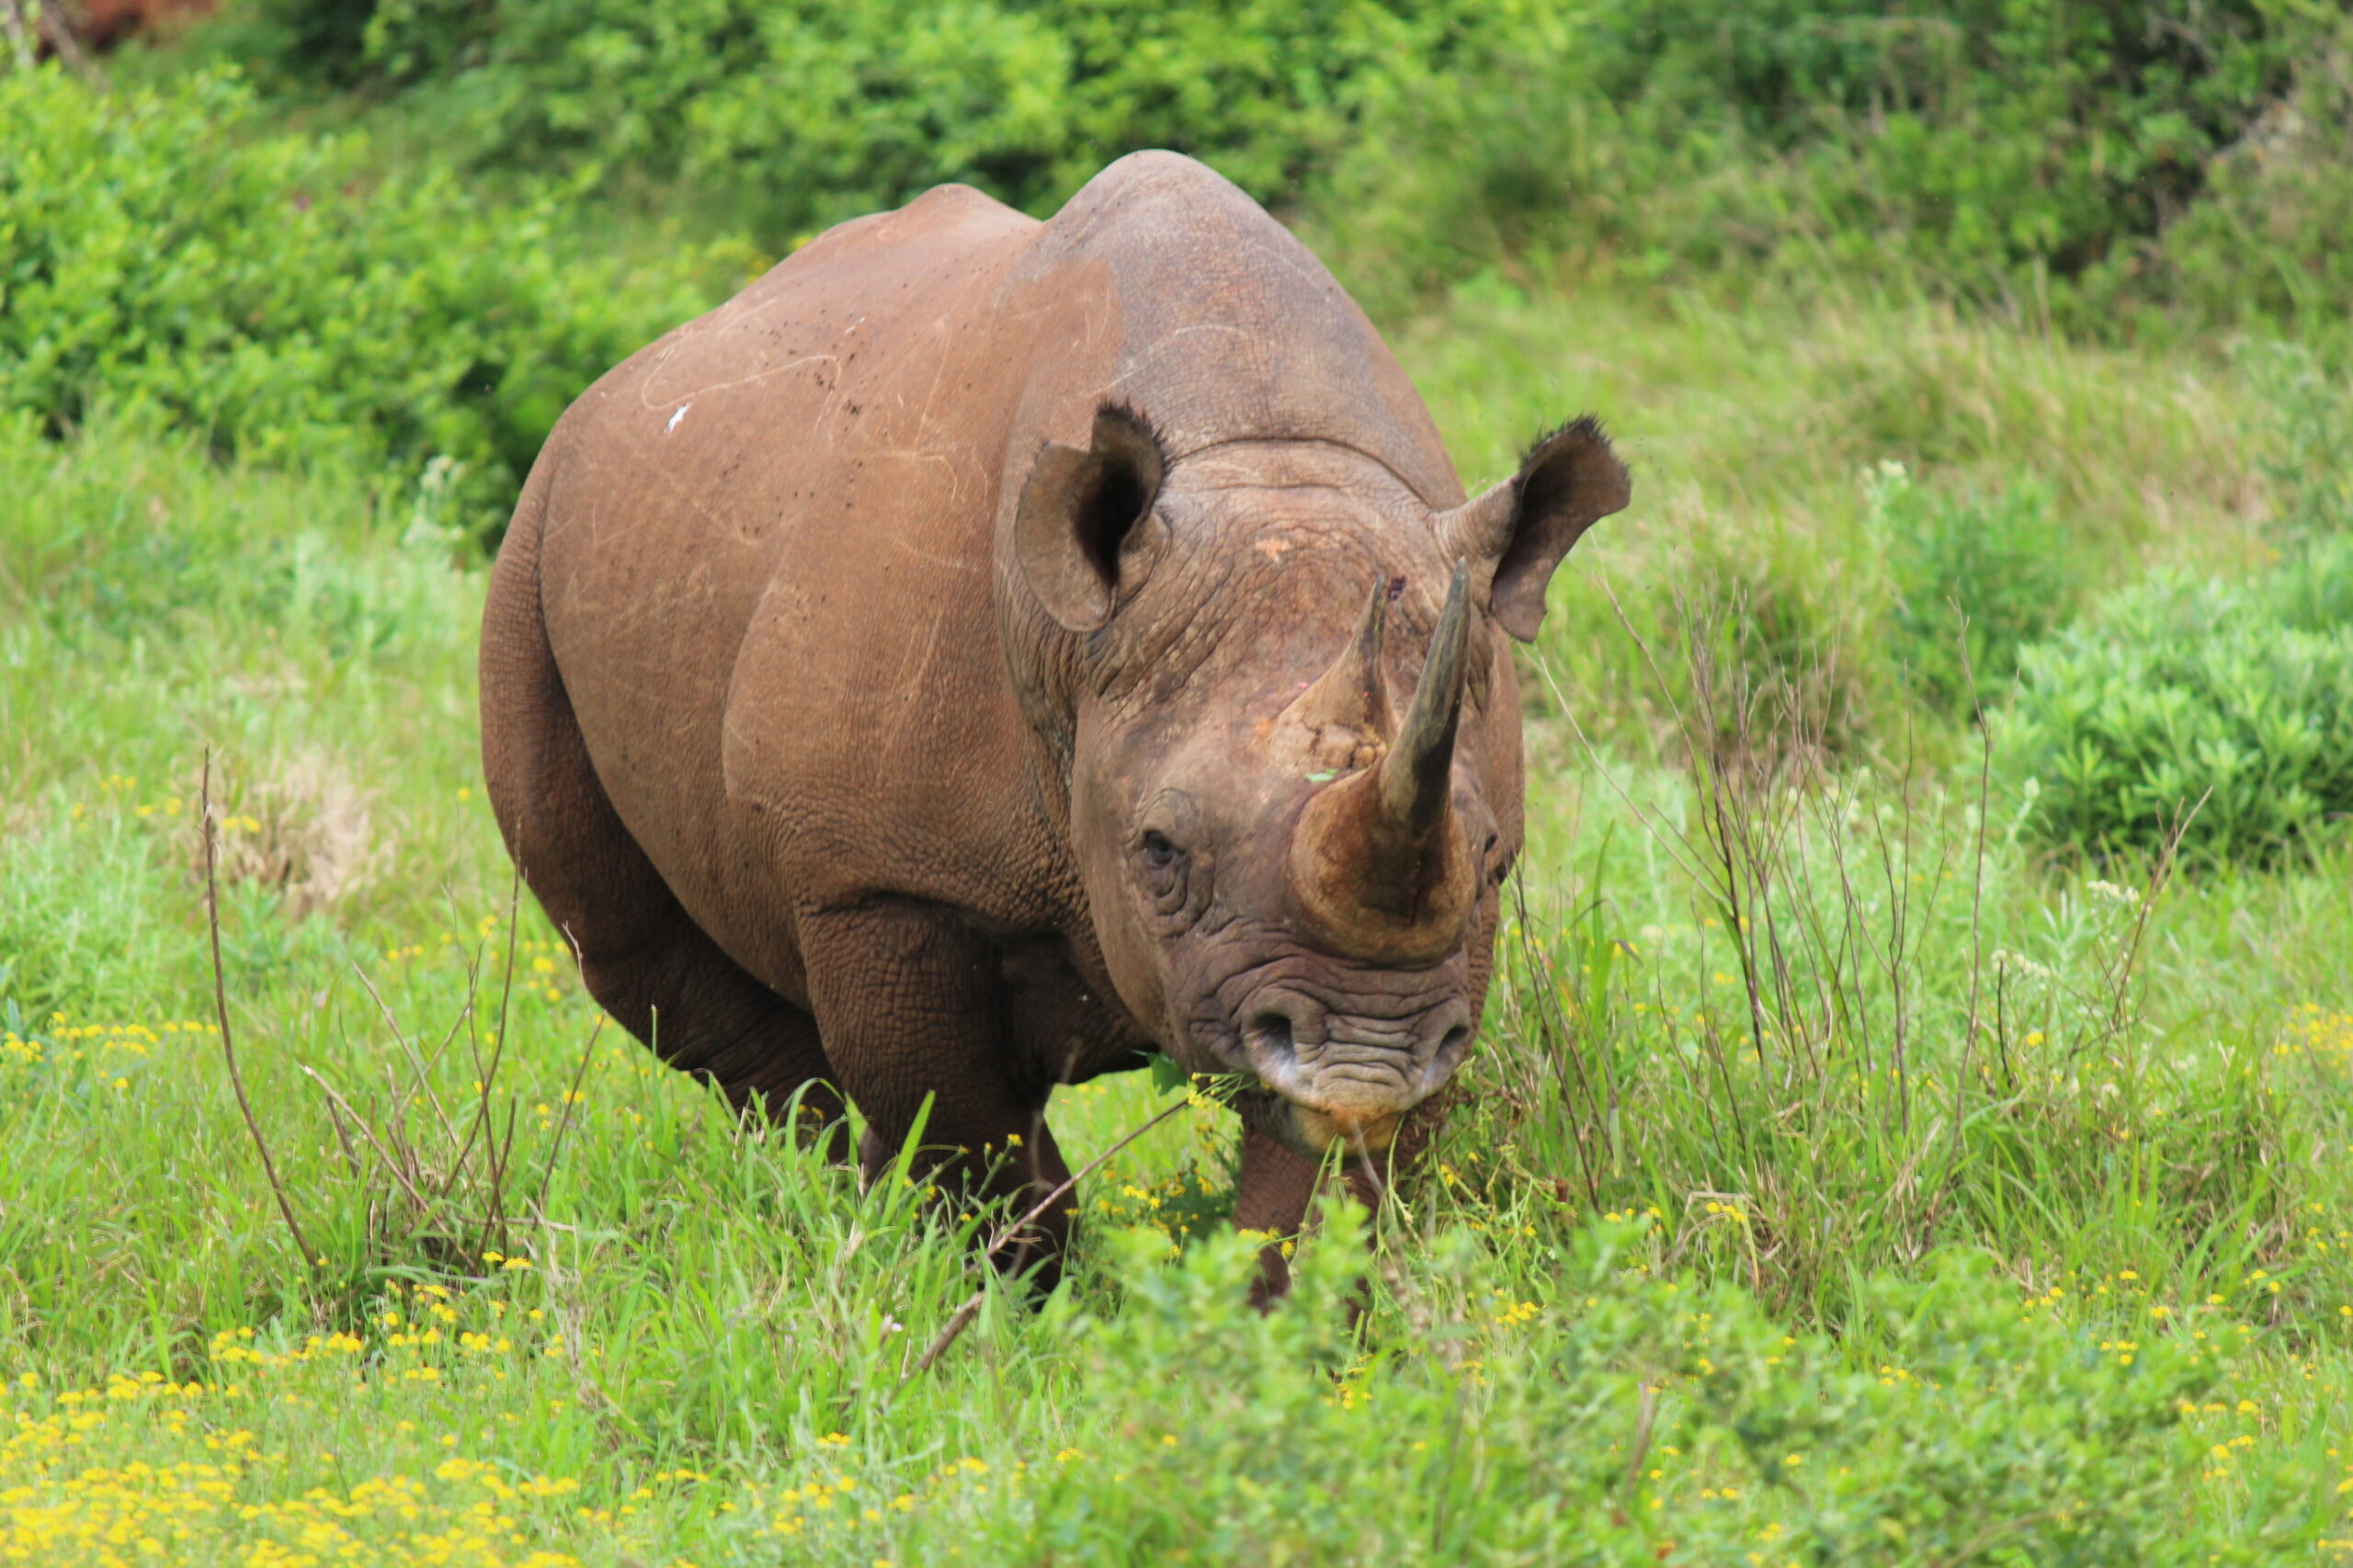 Black rhinoceros at Addo Elephant National Park | The "Big Five" Animals You Will See in an African Safari